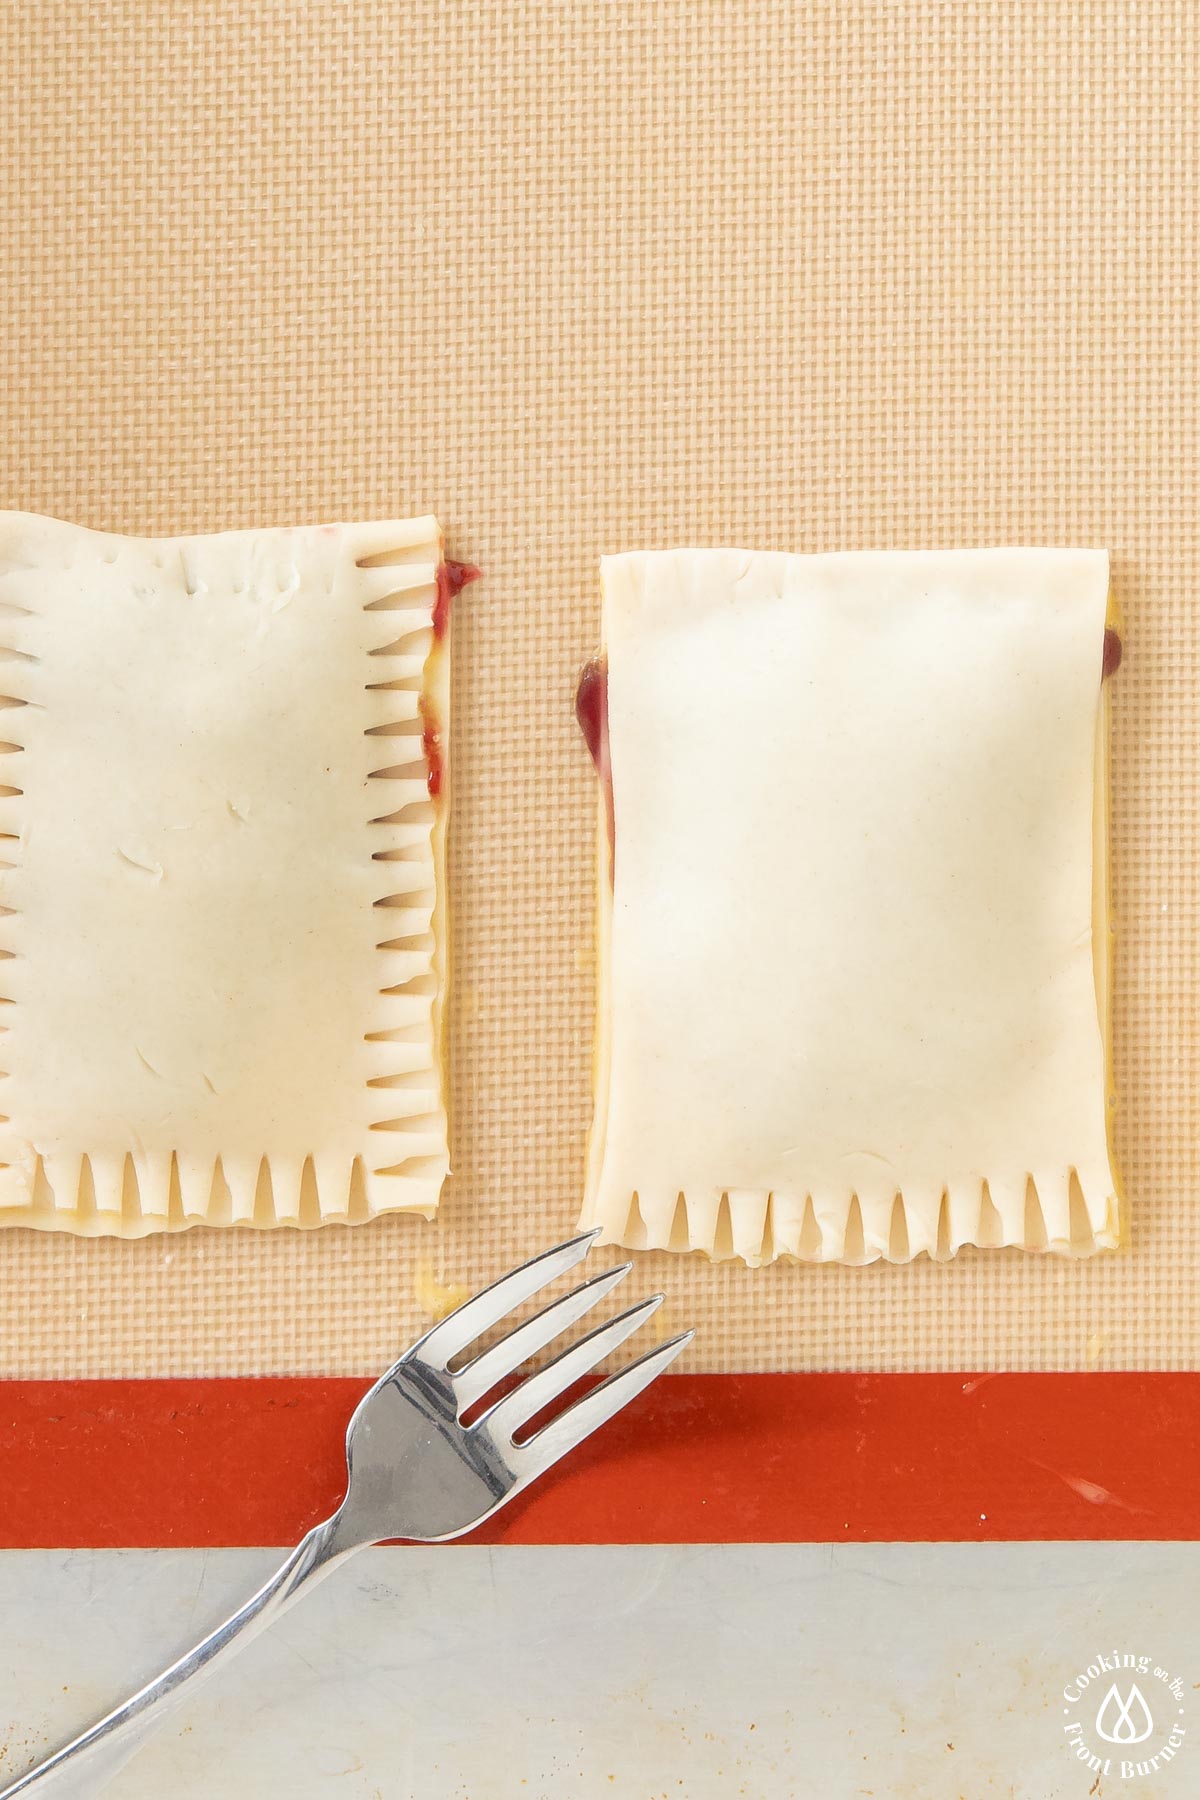 crimping edges of pop tarts with a fork